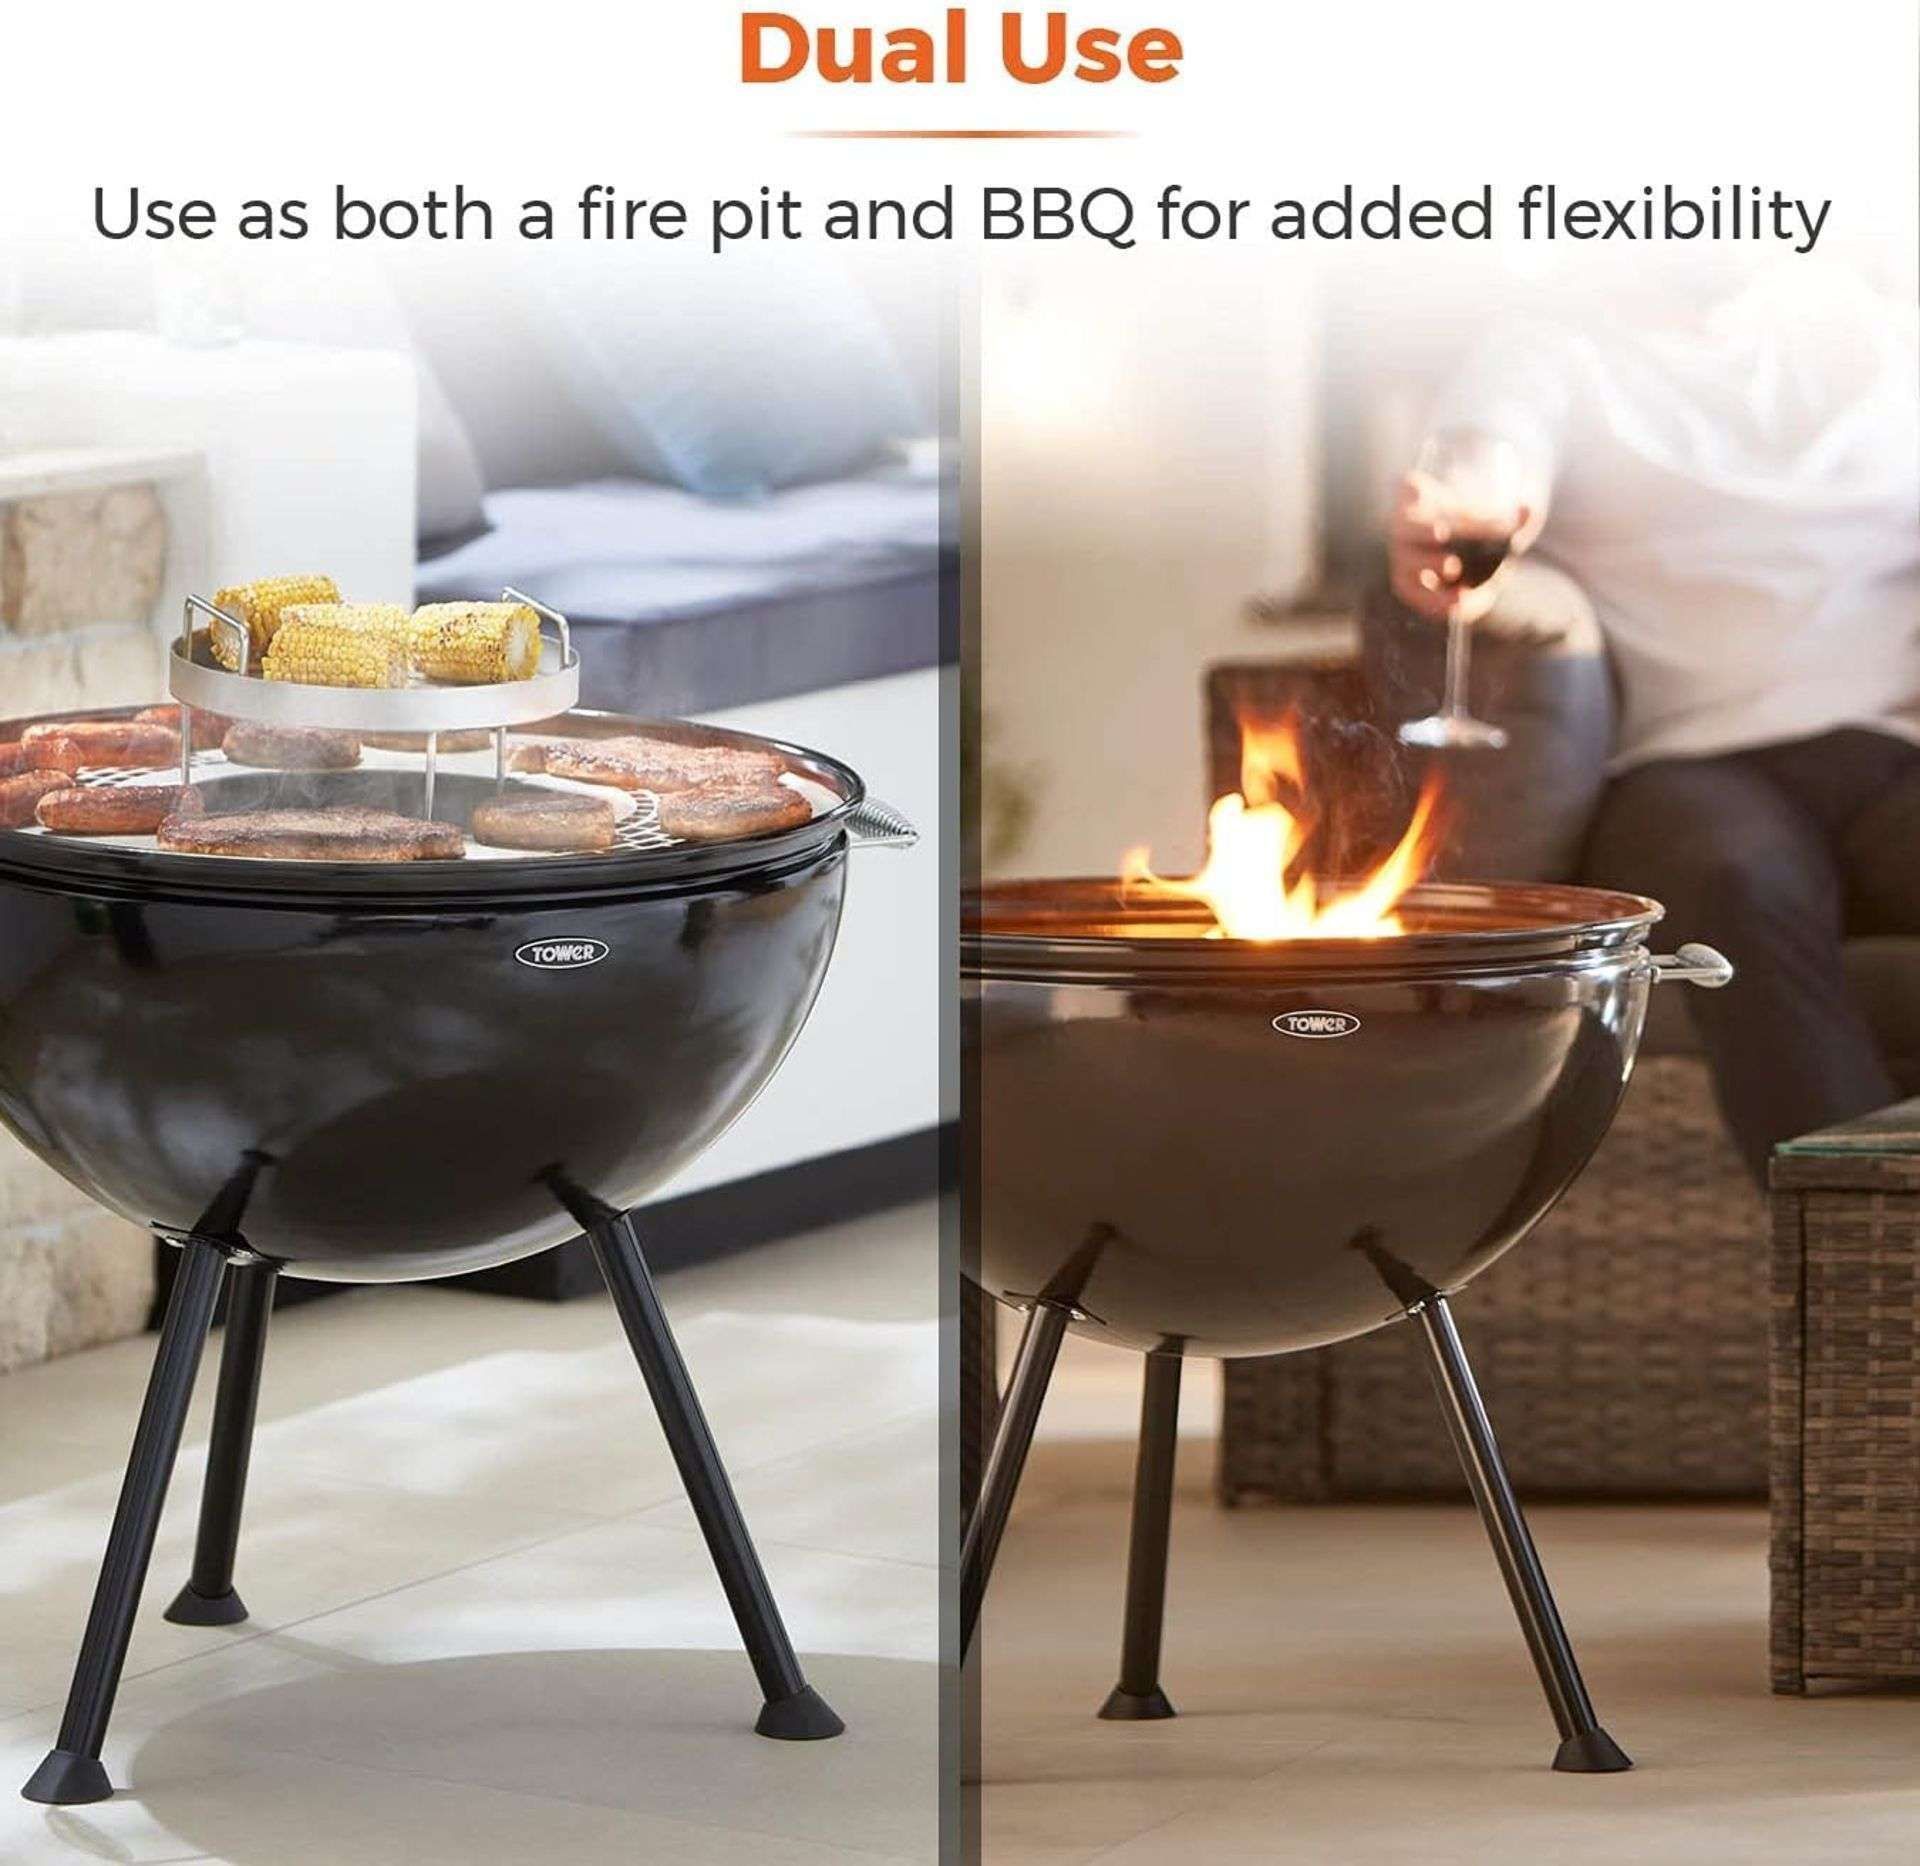 New & Boxed Tower Sphere Fire Pit and BBQ Grill, Black. (VQ577). DUAL USE â€“ This multi- - Image 3 of 5